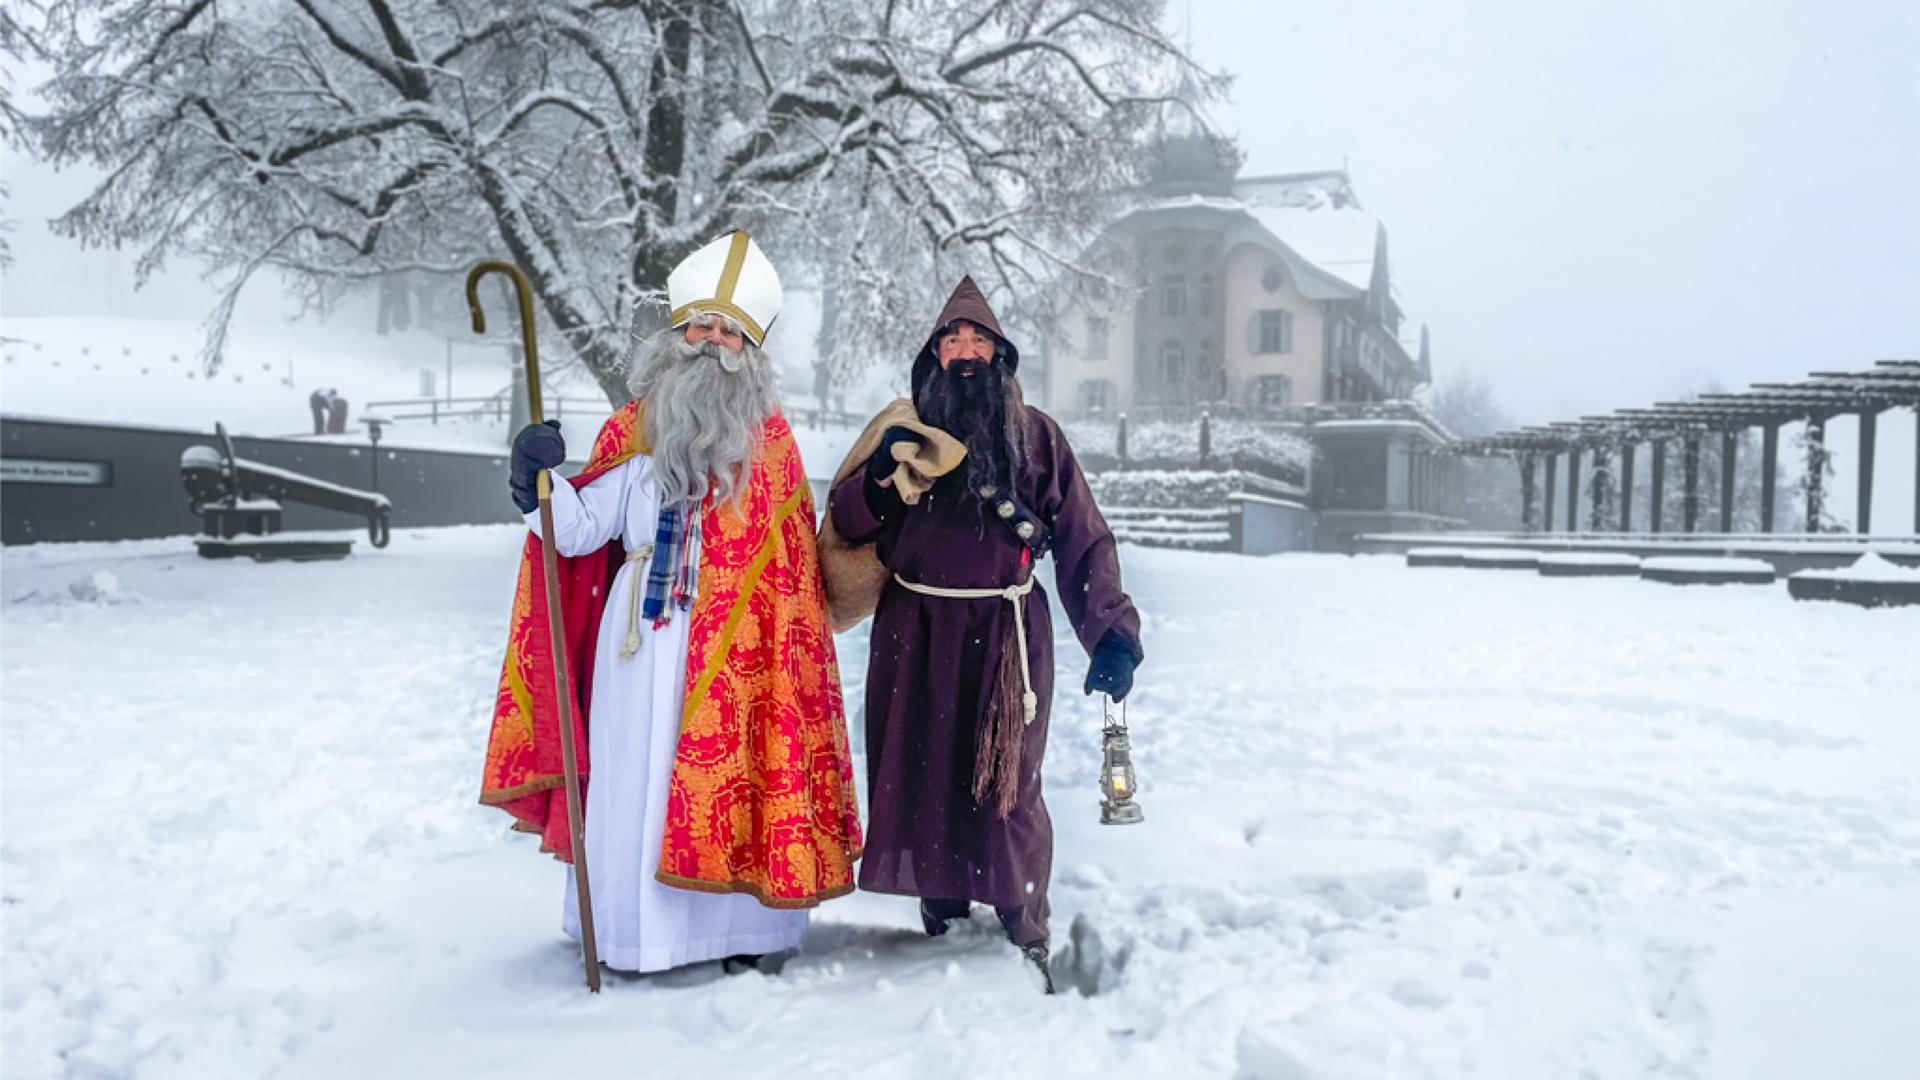 Saint Nicholas and Schmutzli in front of the Kulm building